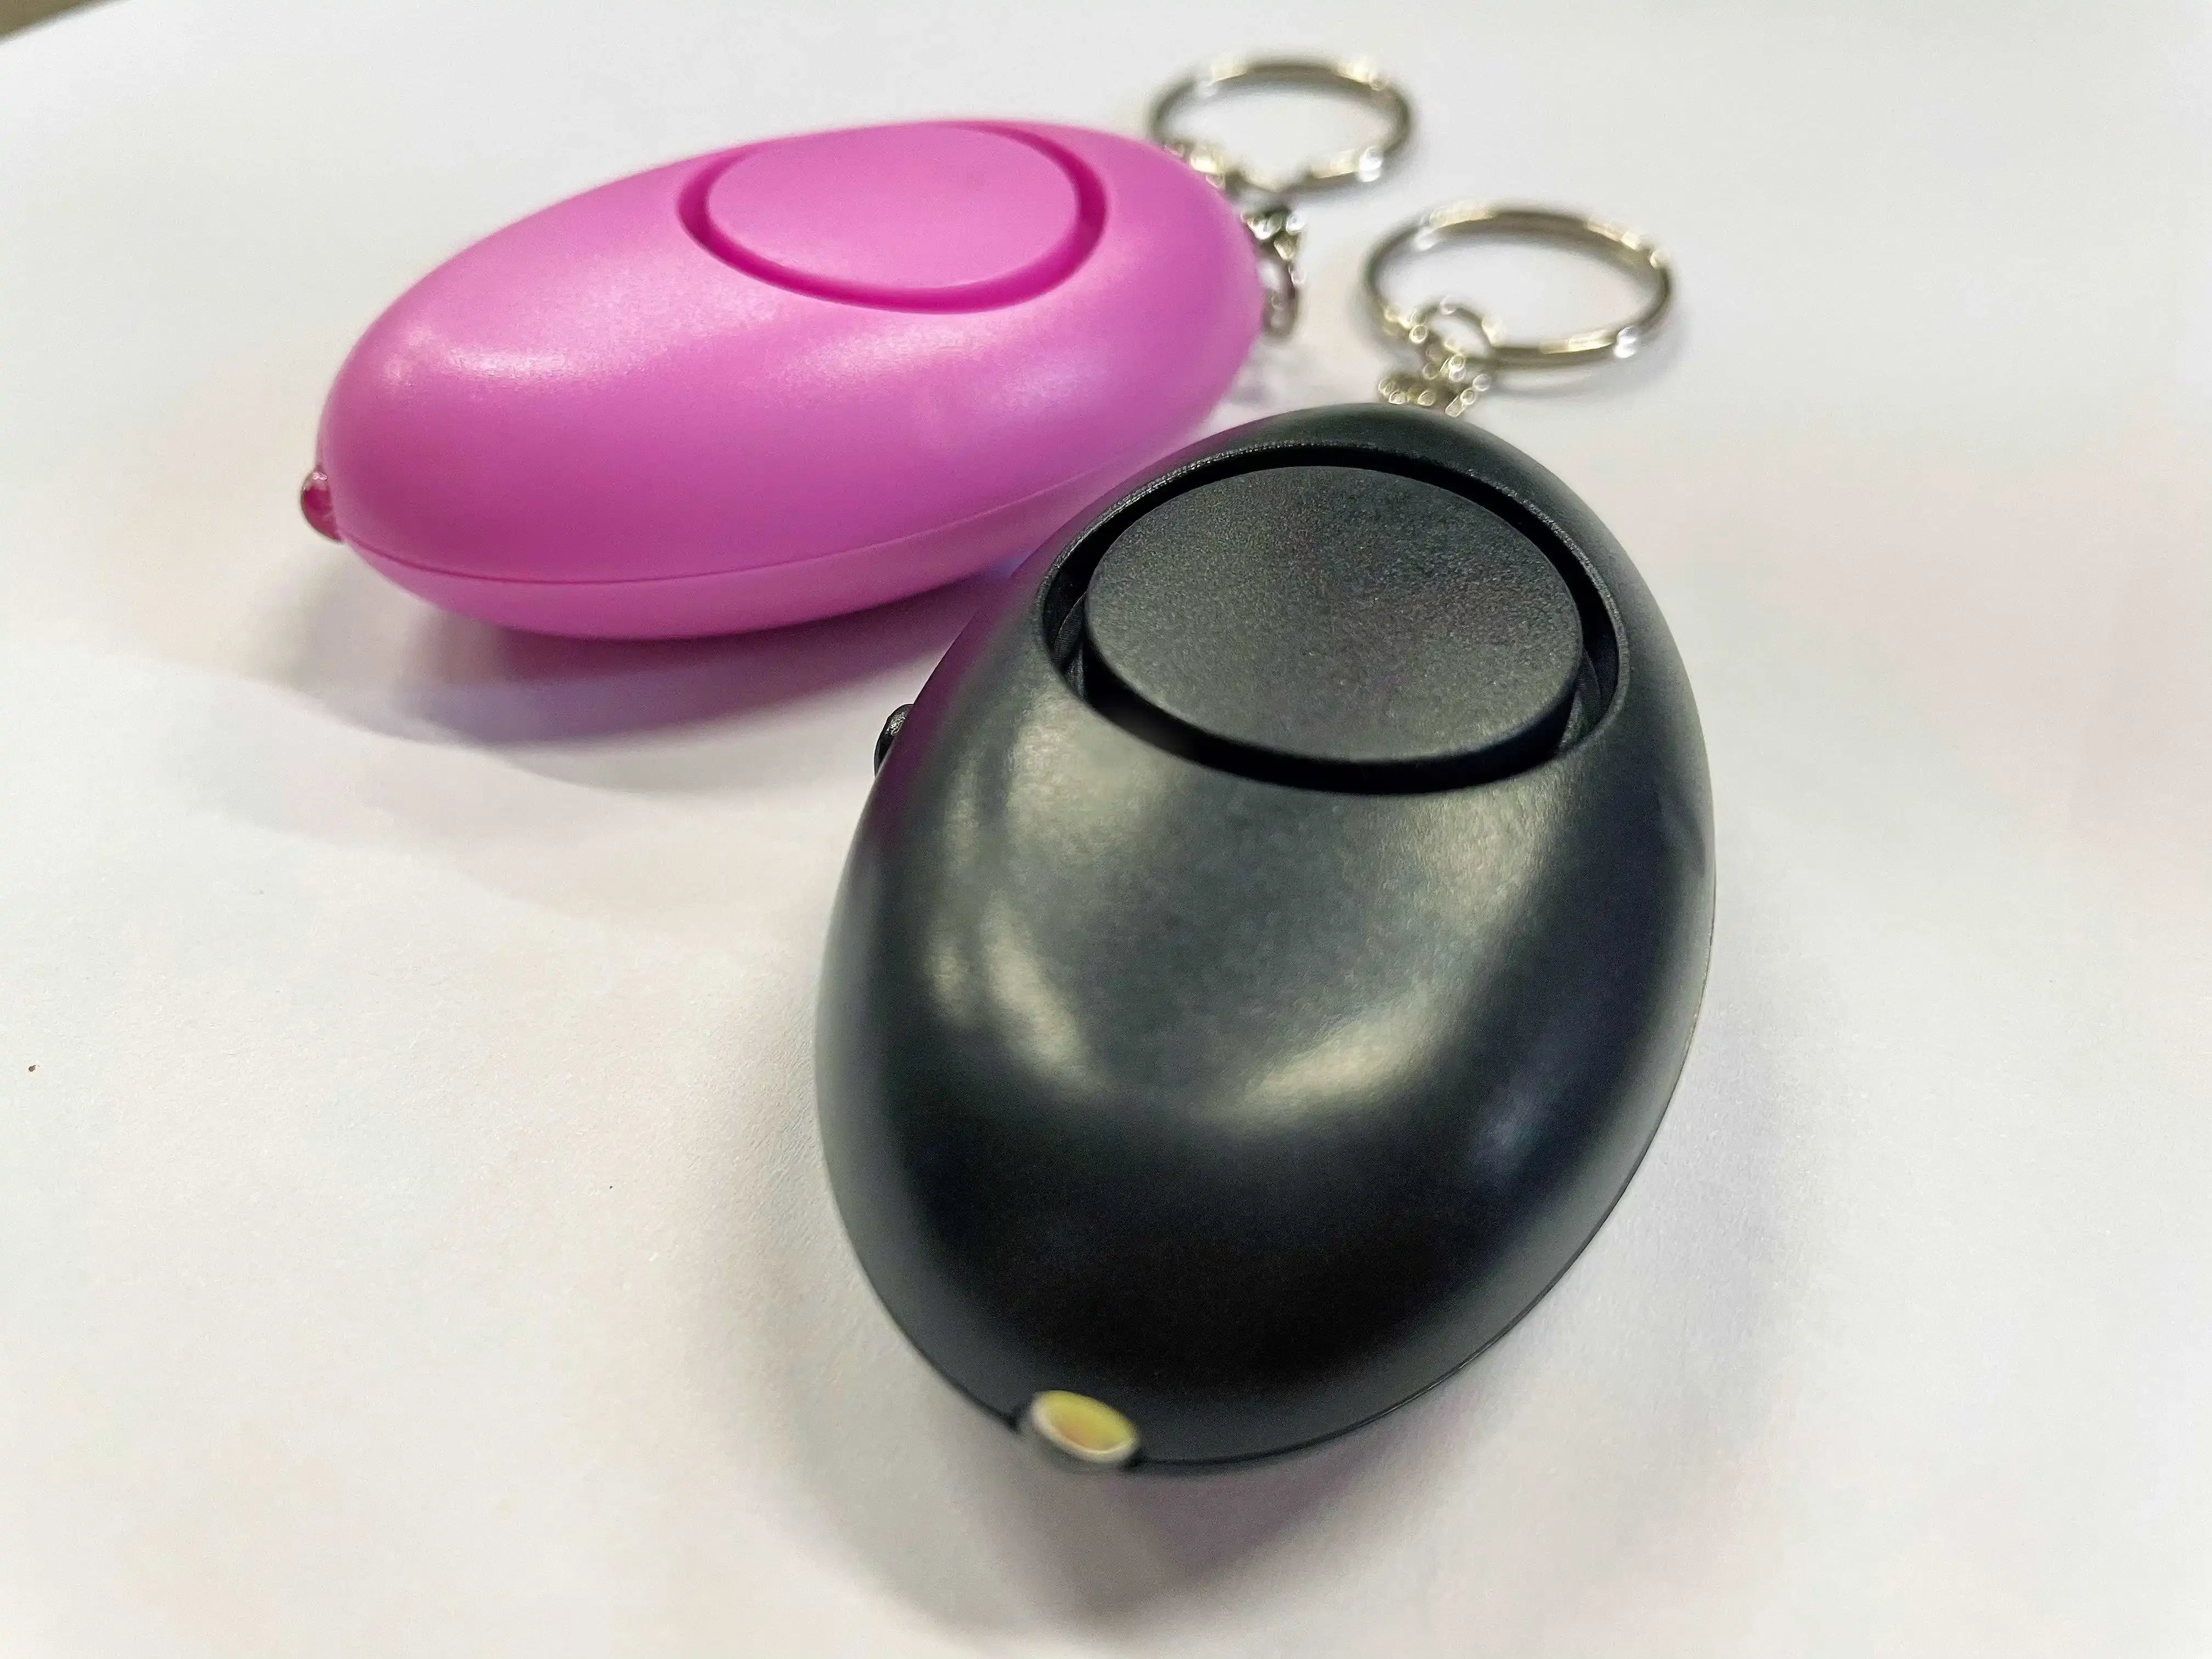 Wholesale 120dB Keychain Person Defence Anti Attack Rape Emergency Alarm Personal Safety Security Alarm Keychain